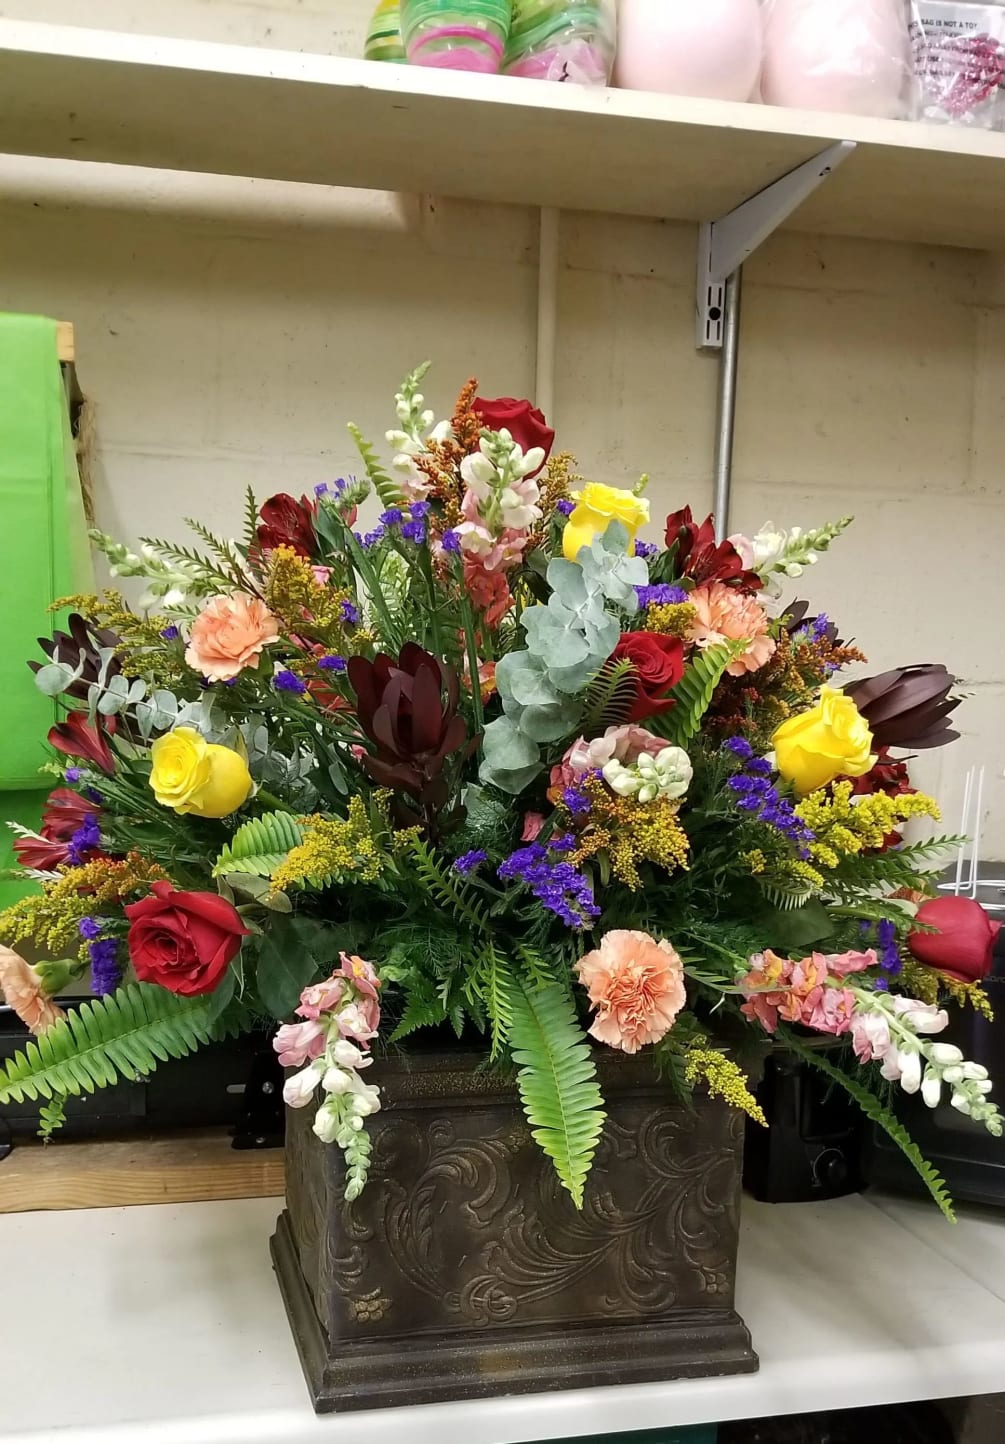 A full and big arrangement of mixed flowers for the center of